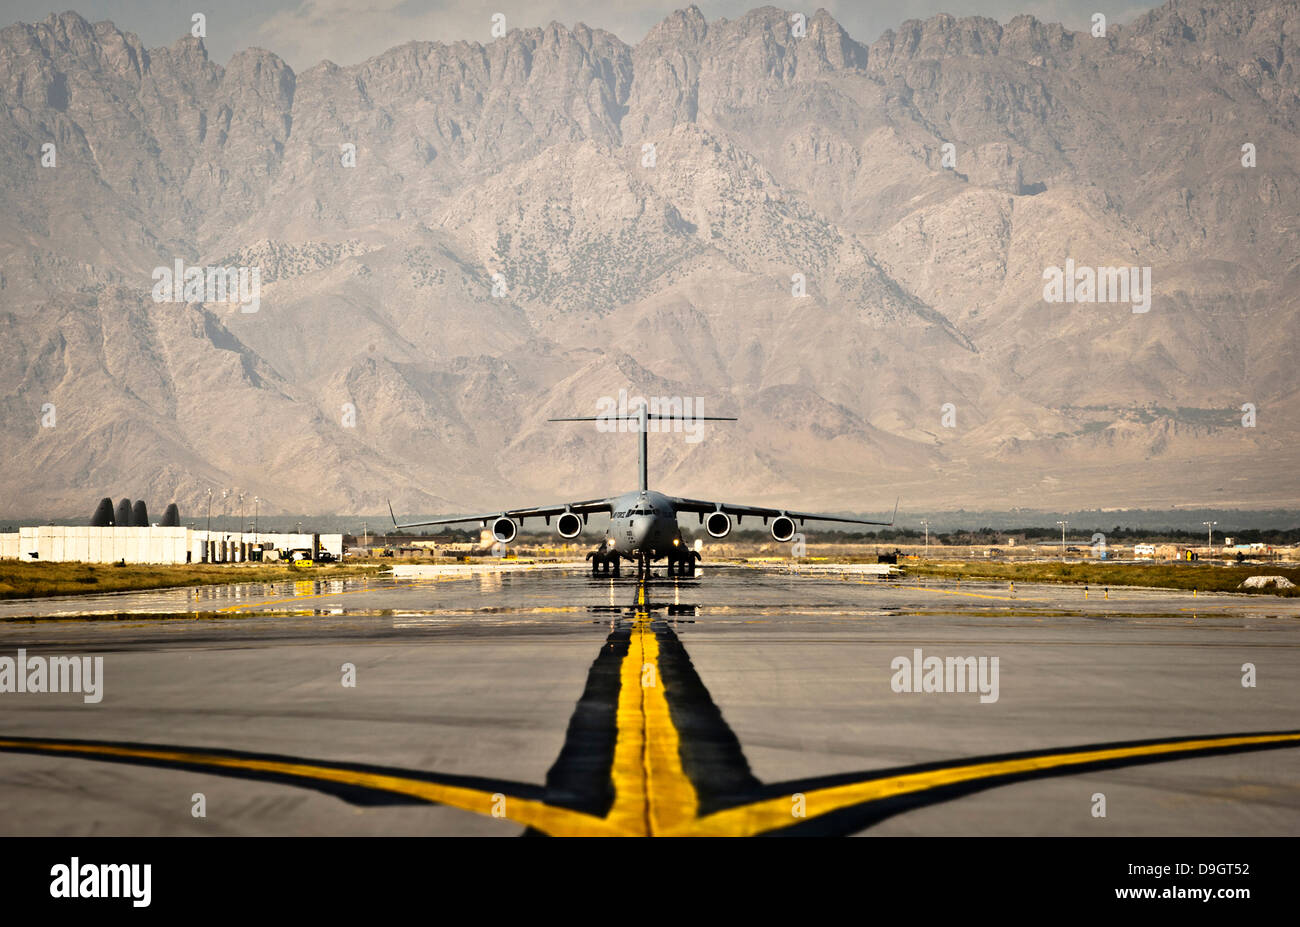 September 25, 2012 - A C-17 Globemaster III taxis to its parking spot at Bagram Airfield, Afghanistan. Stock Photo